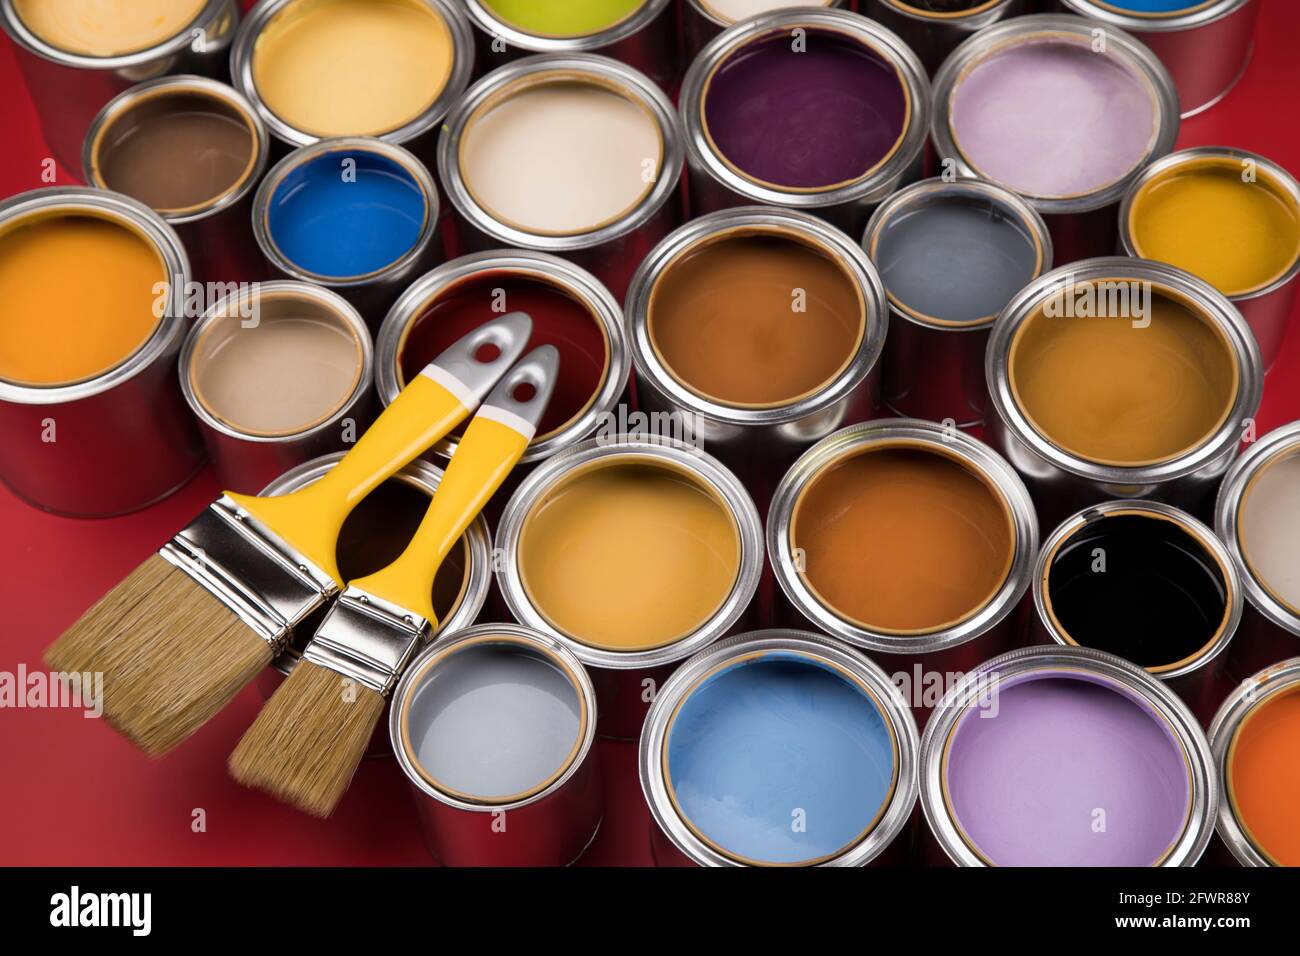 Close-up of red paint brushes in a metal jar. Stock Photo by puhimec